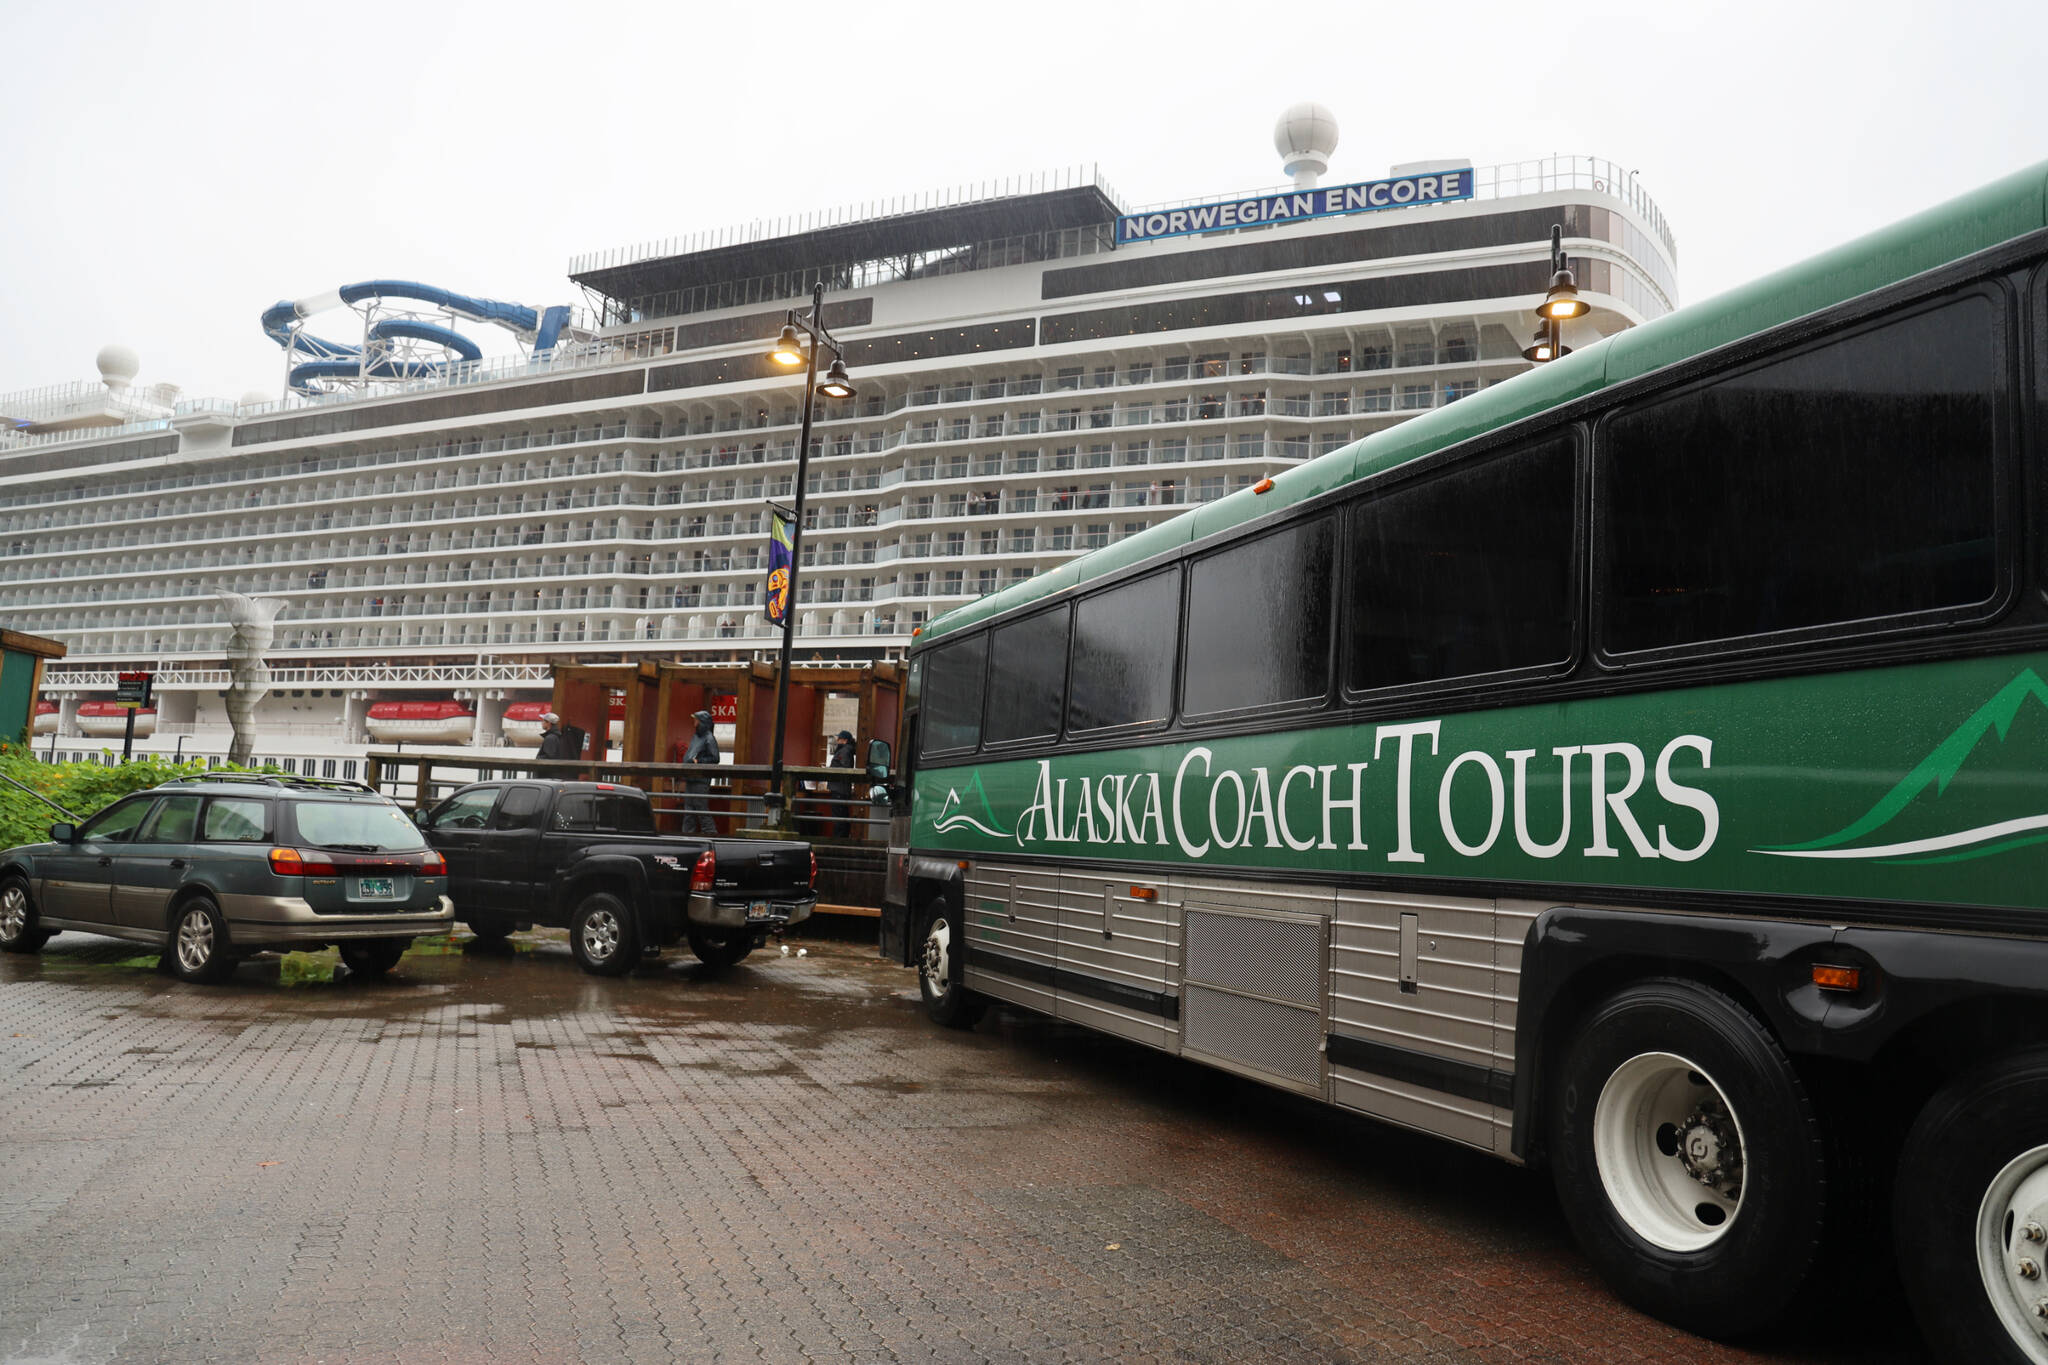 Clarise Larson / Juneau Empire
An Alaska Coach Tours bus sits parked beside the cruise ship dock in downtown Juneau. Alexandra Pierce, the CBJ tourism manager, said this year’s season went “relatively smoothly” and said the revival of tourism was overall well received by the residents and downtown businesses.